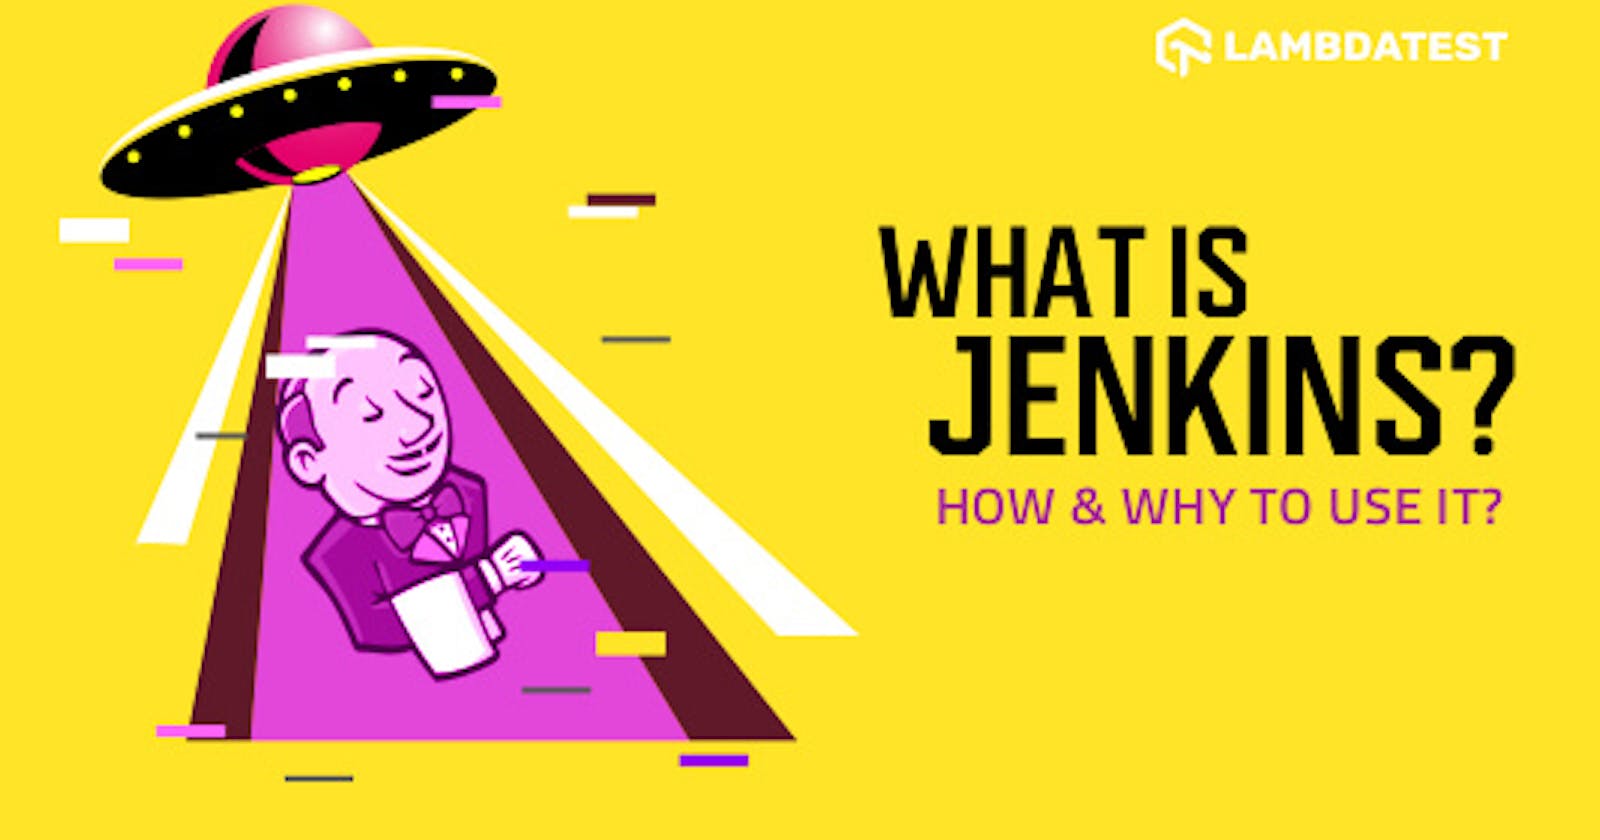 What Is Jenkins? How & Why To Use It?